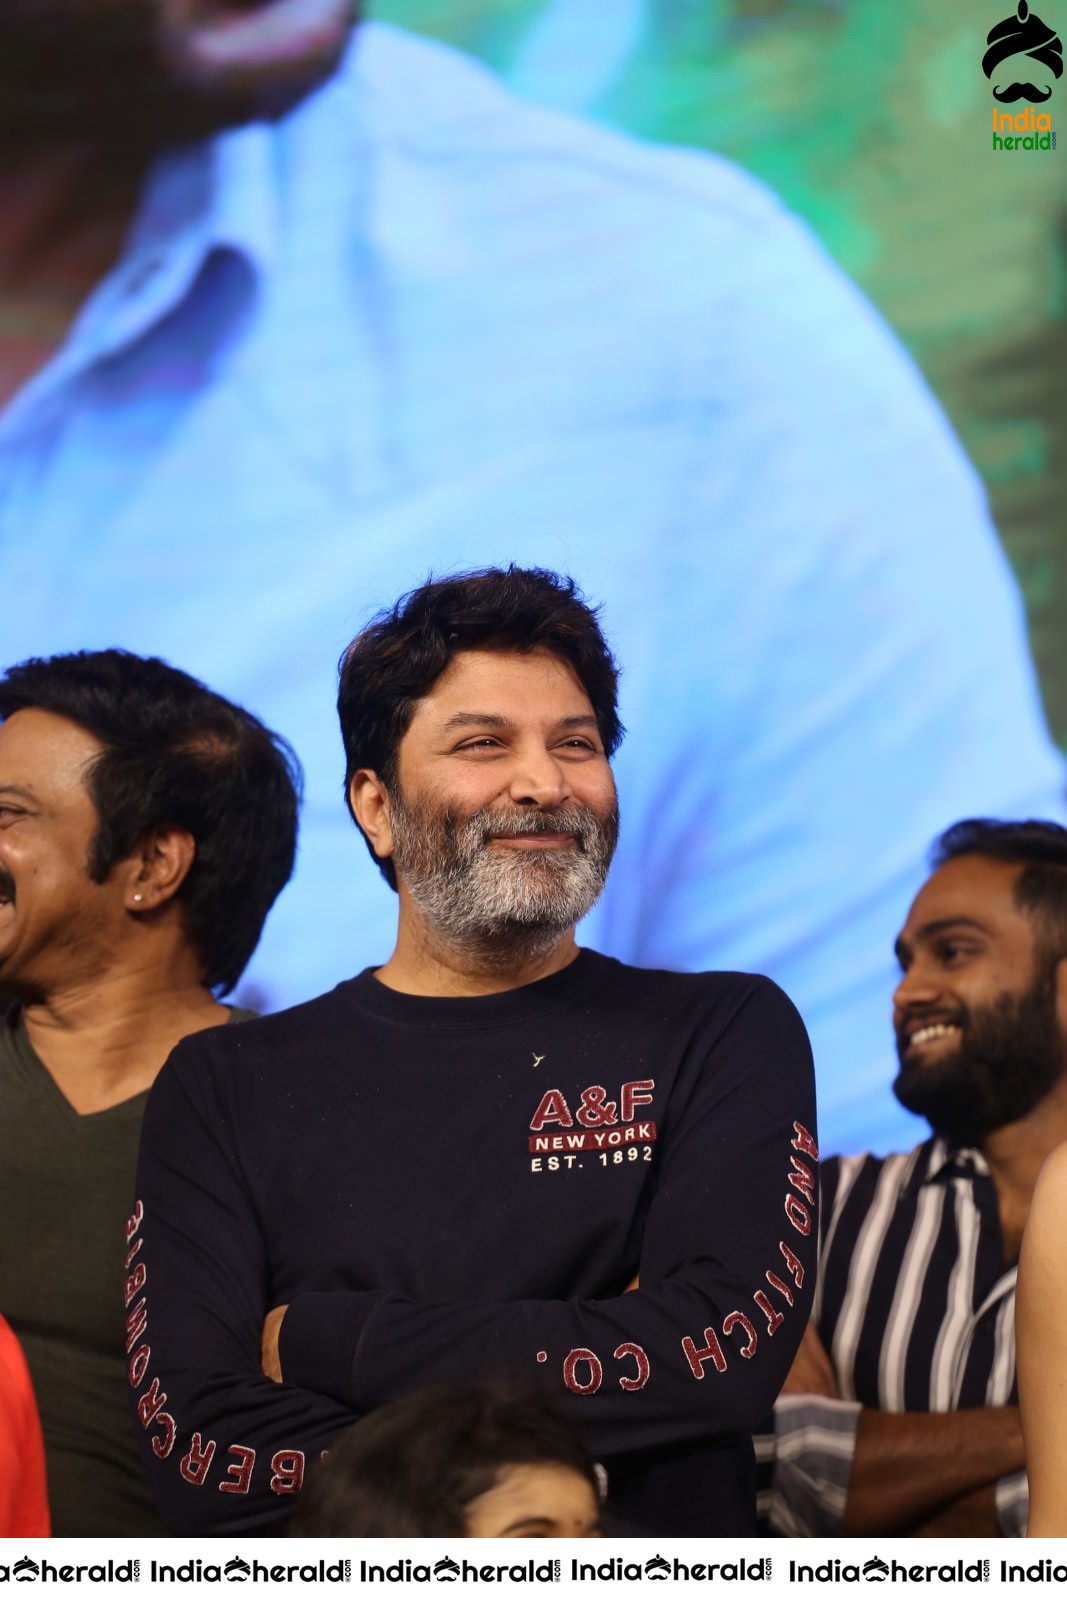 Director Trivikram Srinivas is all smiles and he has a Happy Gala time